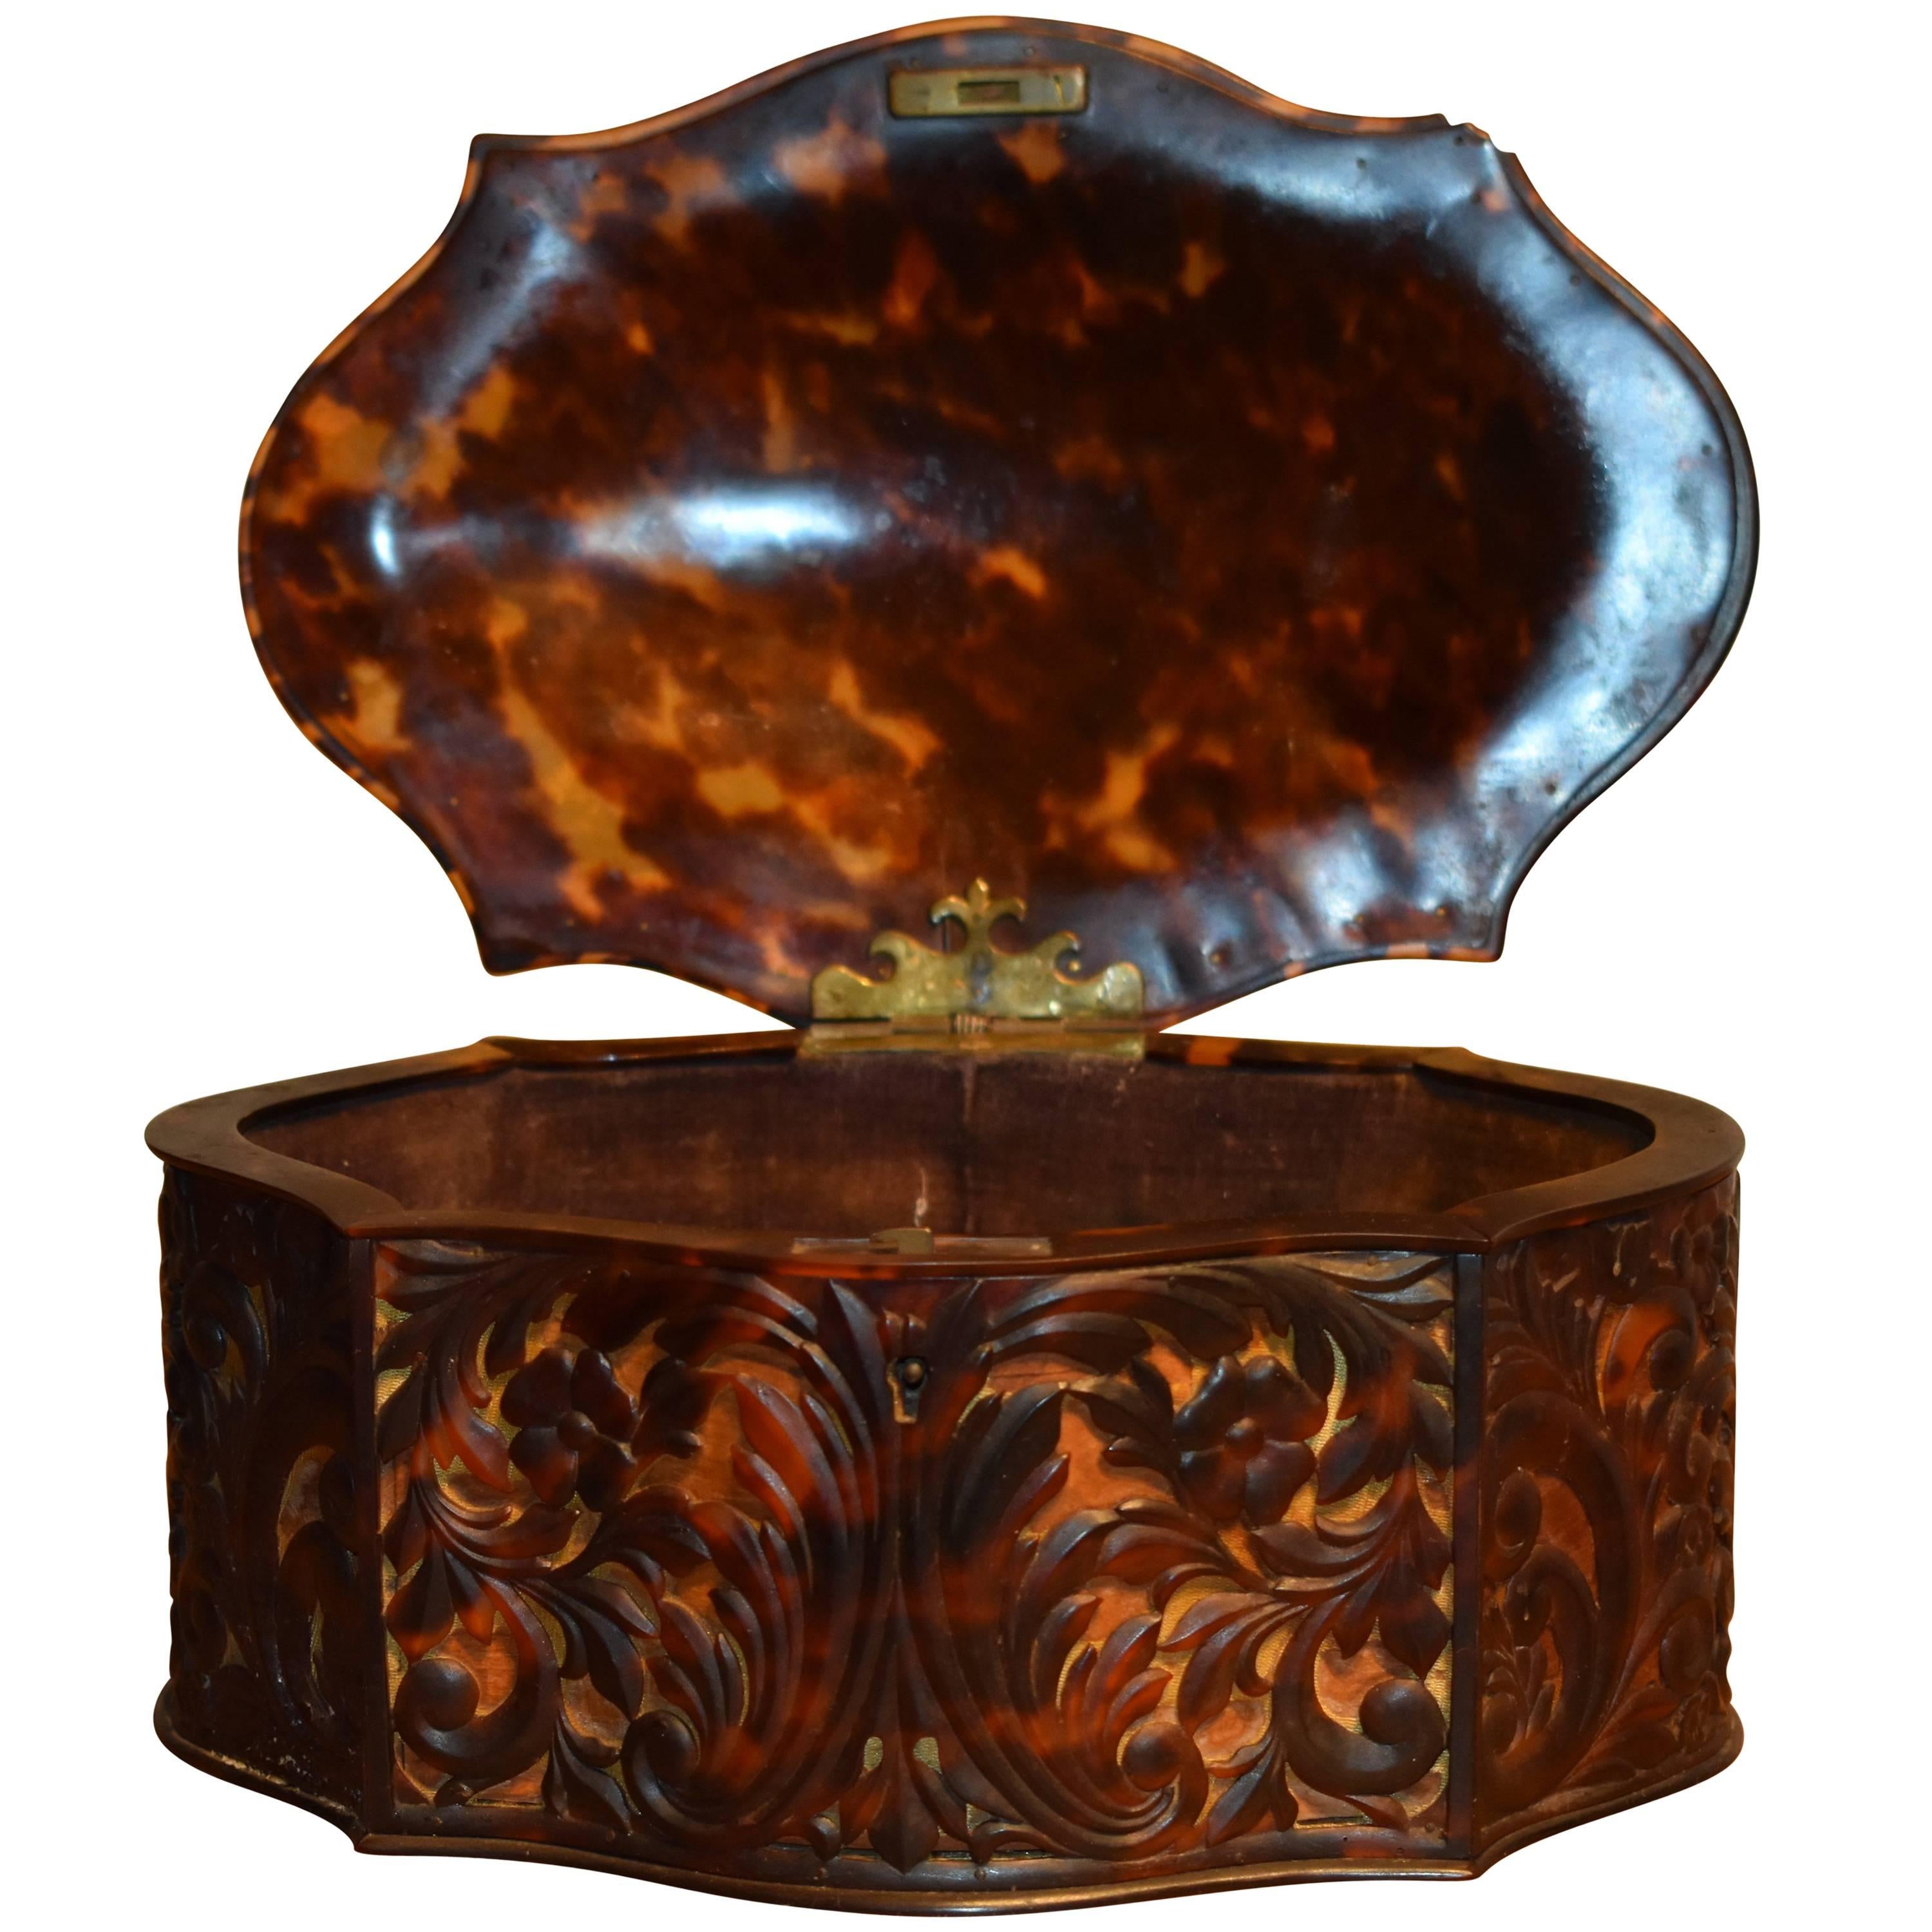 FINAL SALE Antique Carved Faux Tortoiseshell Jewelry Box For Sale